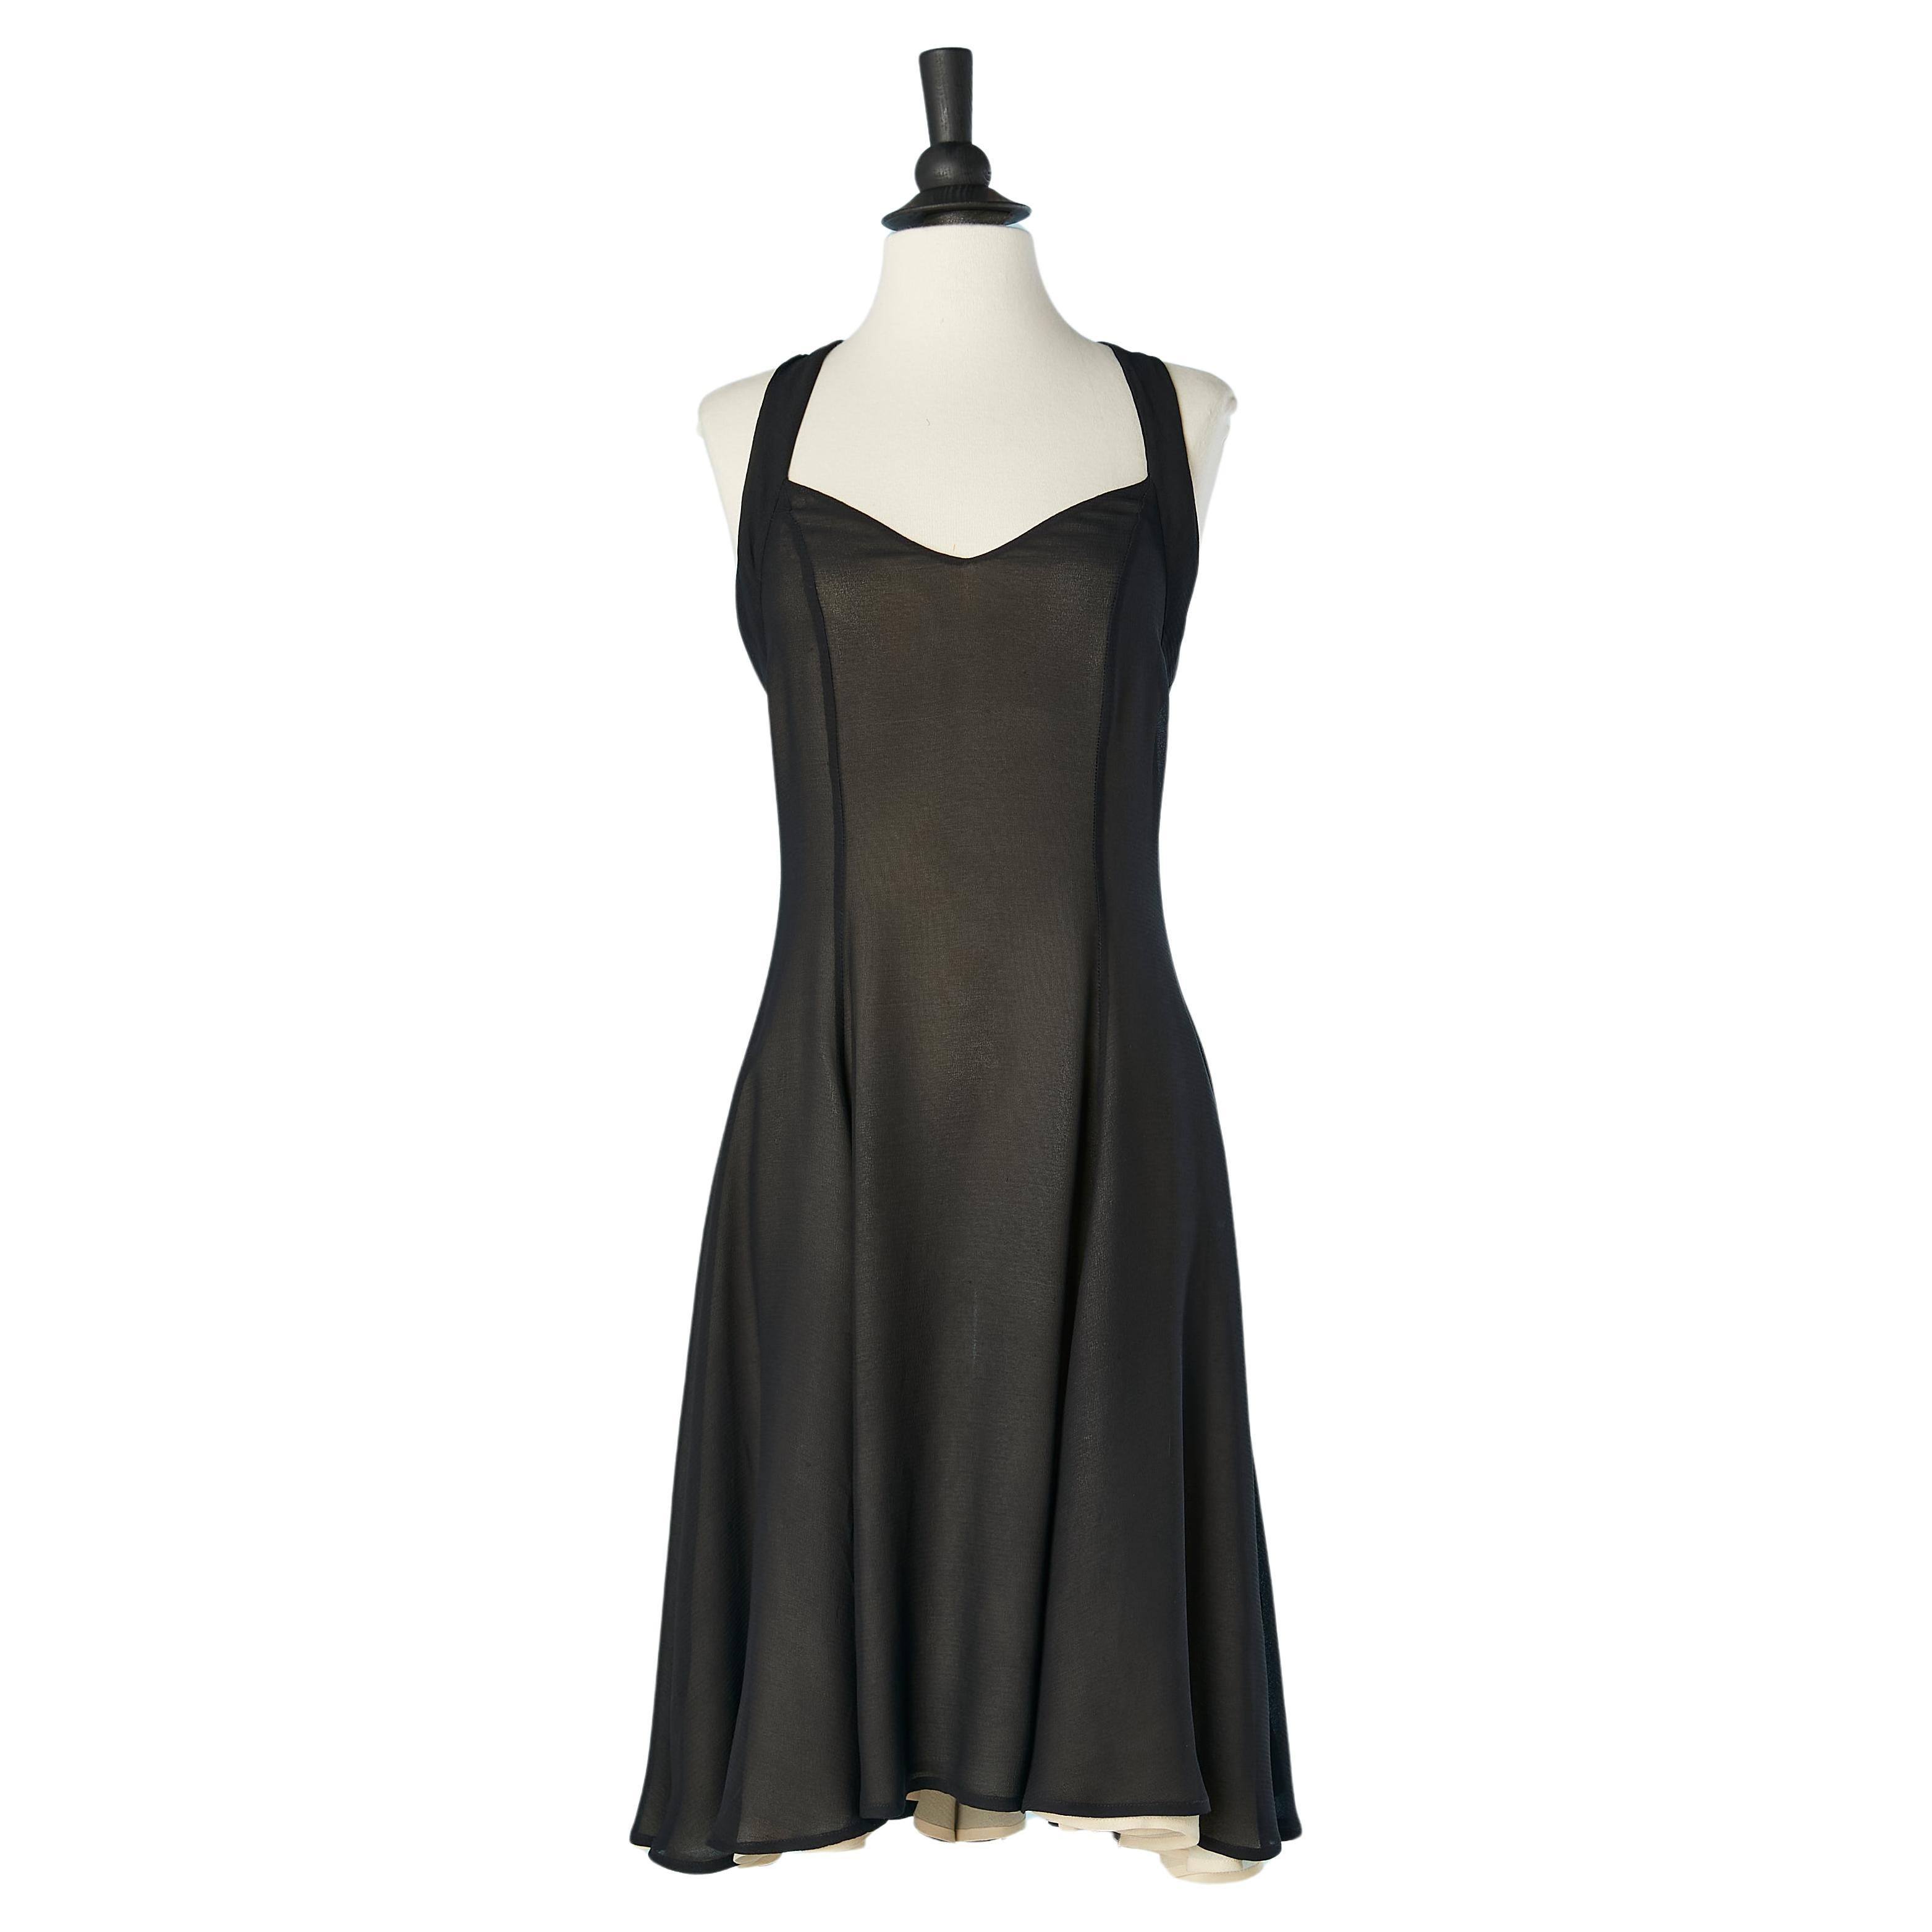 Black double lay silk chiffon backless cocktail dress open in the back ROCHAS  For Sale